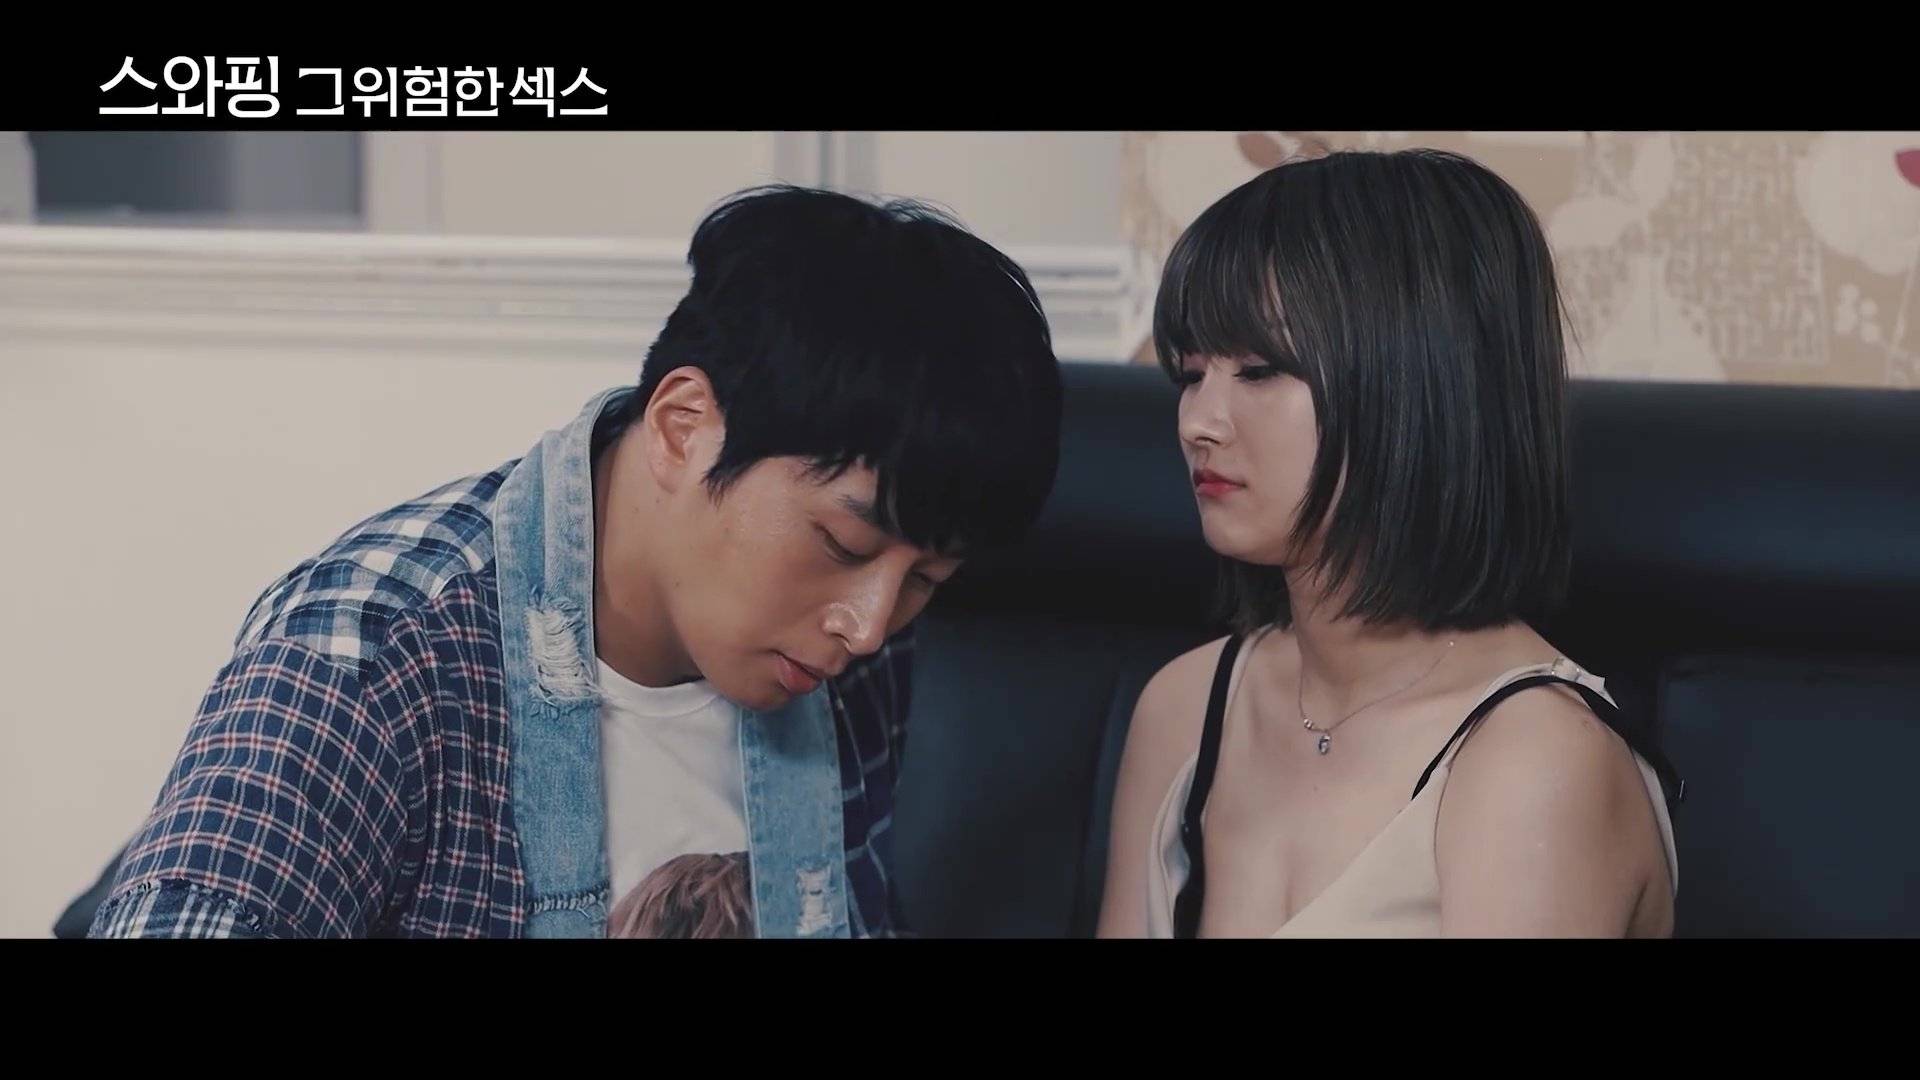 [Video] Trailer Released for the Korean Movie 'Swapping, That Dangerous ...